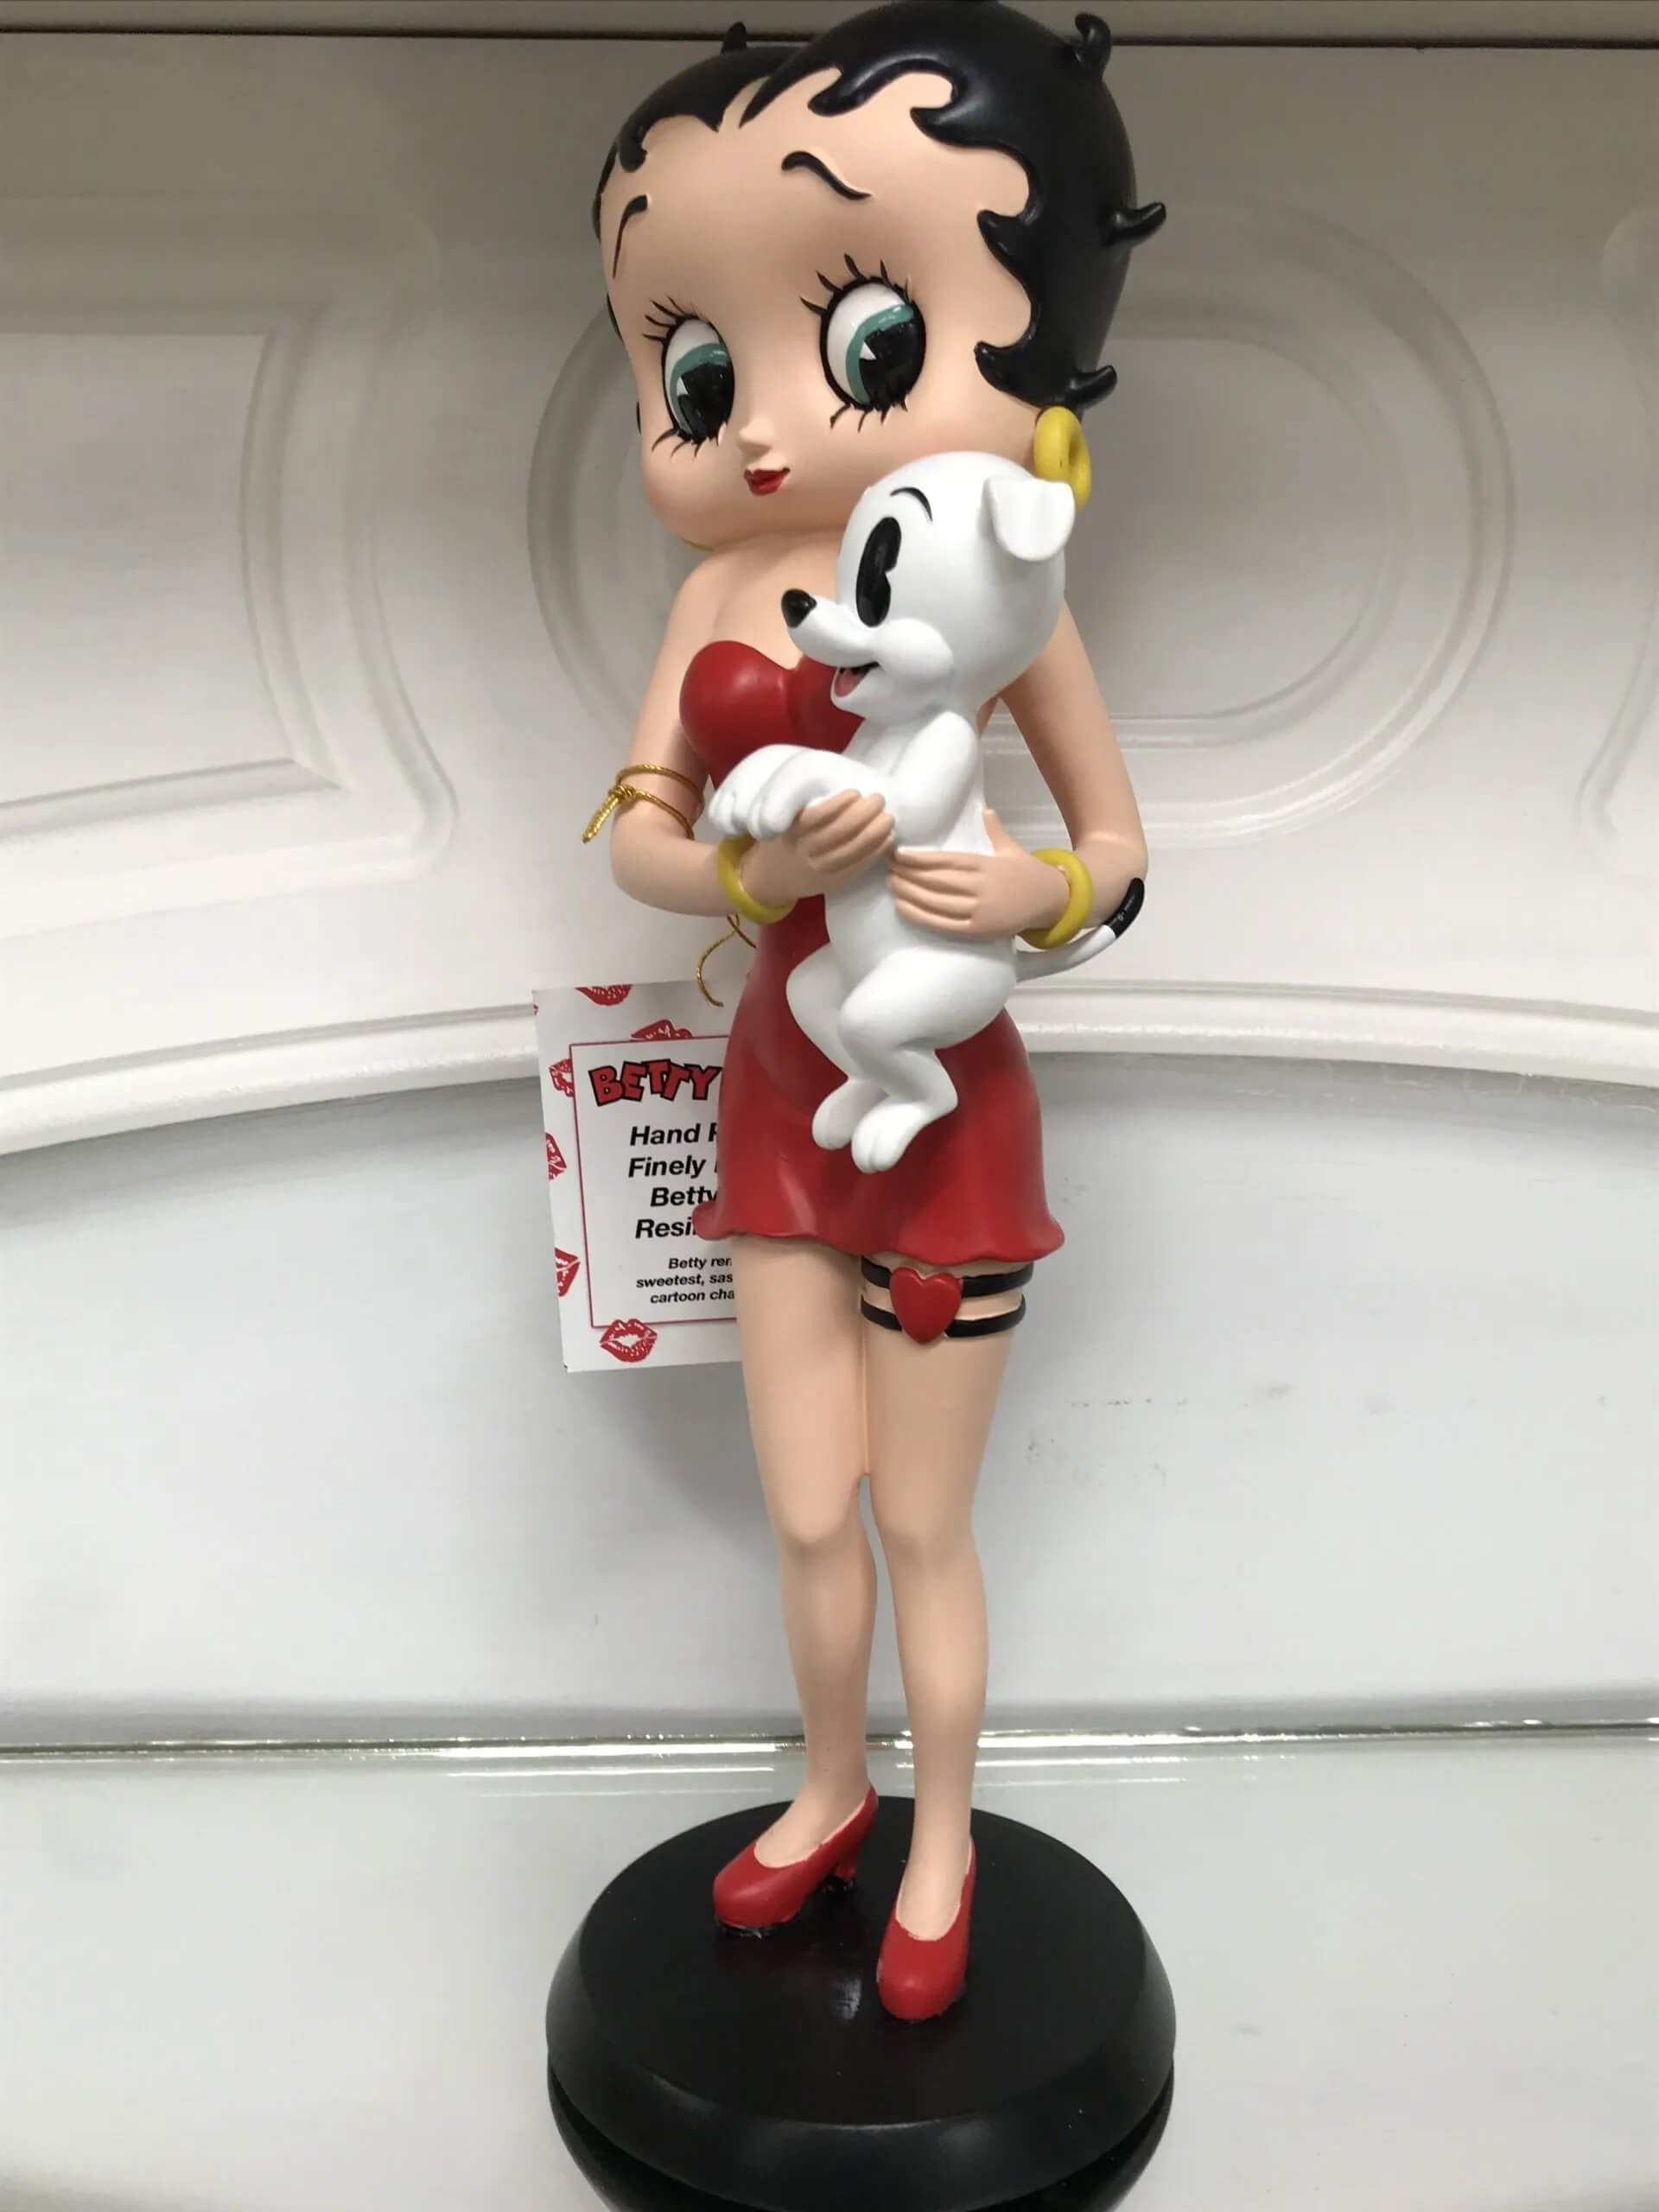 betty boop statues